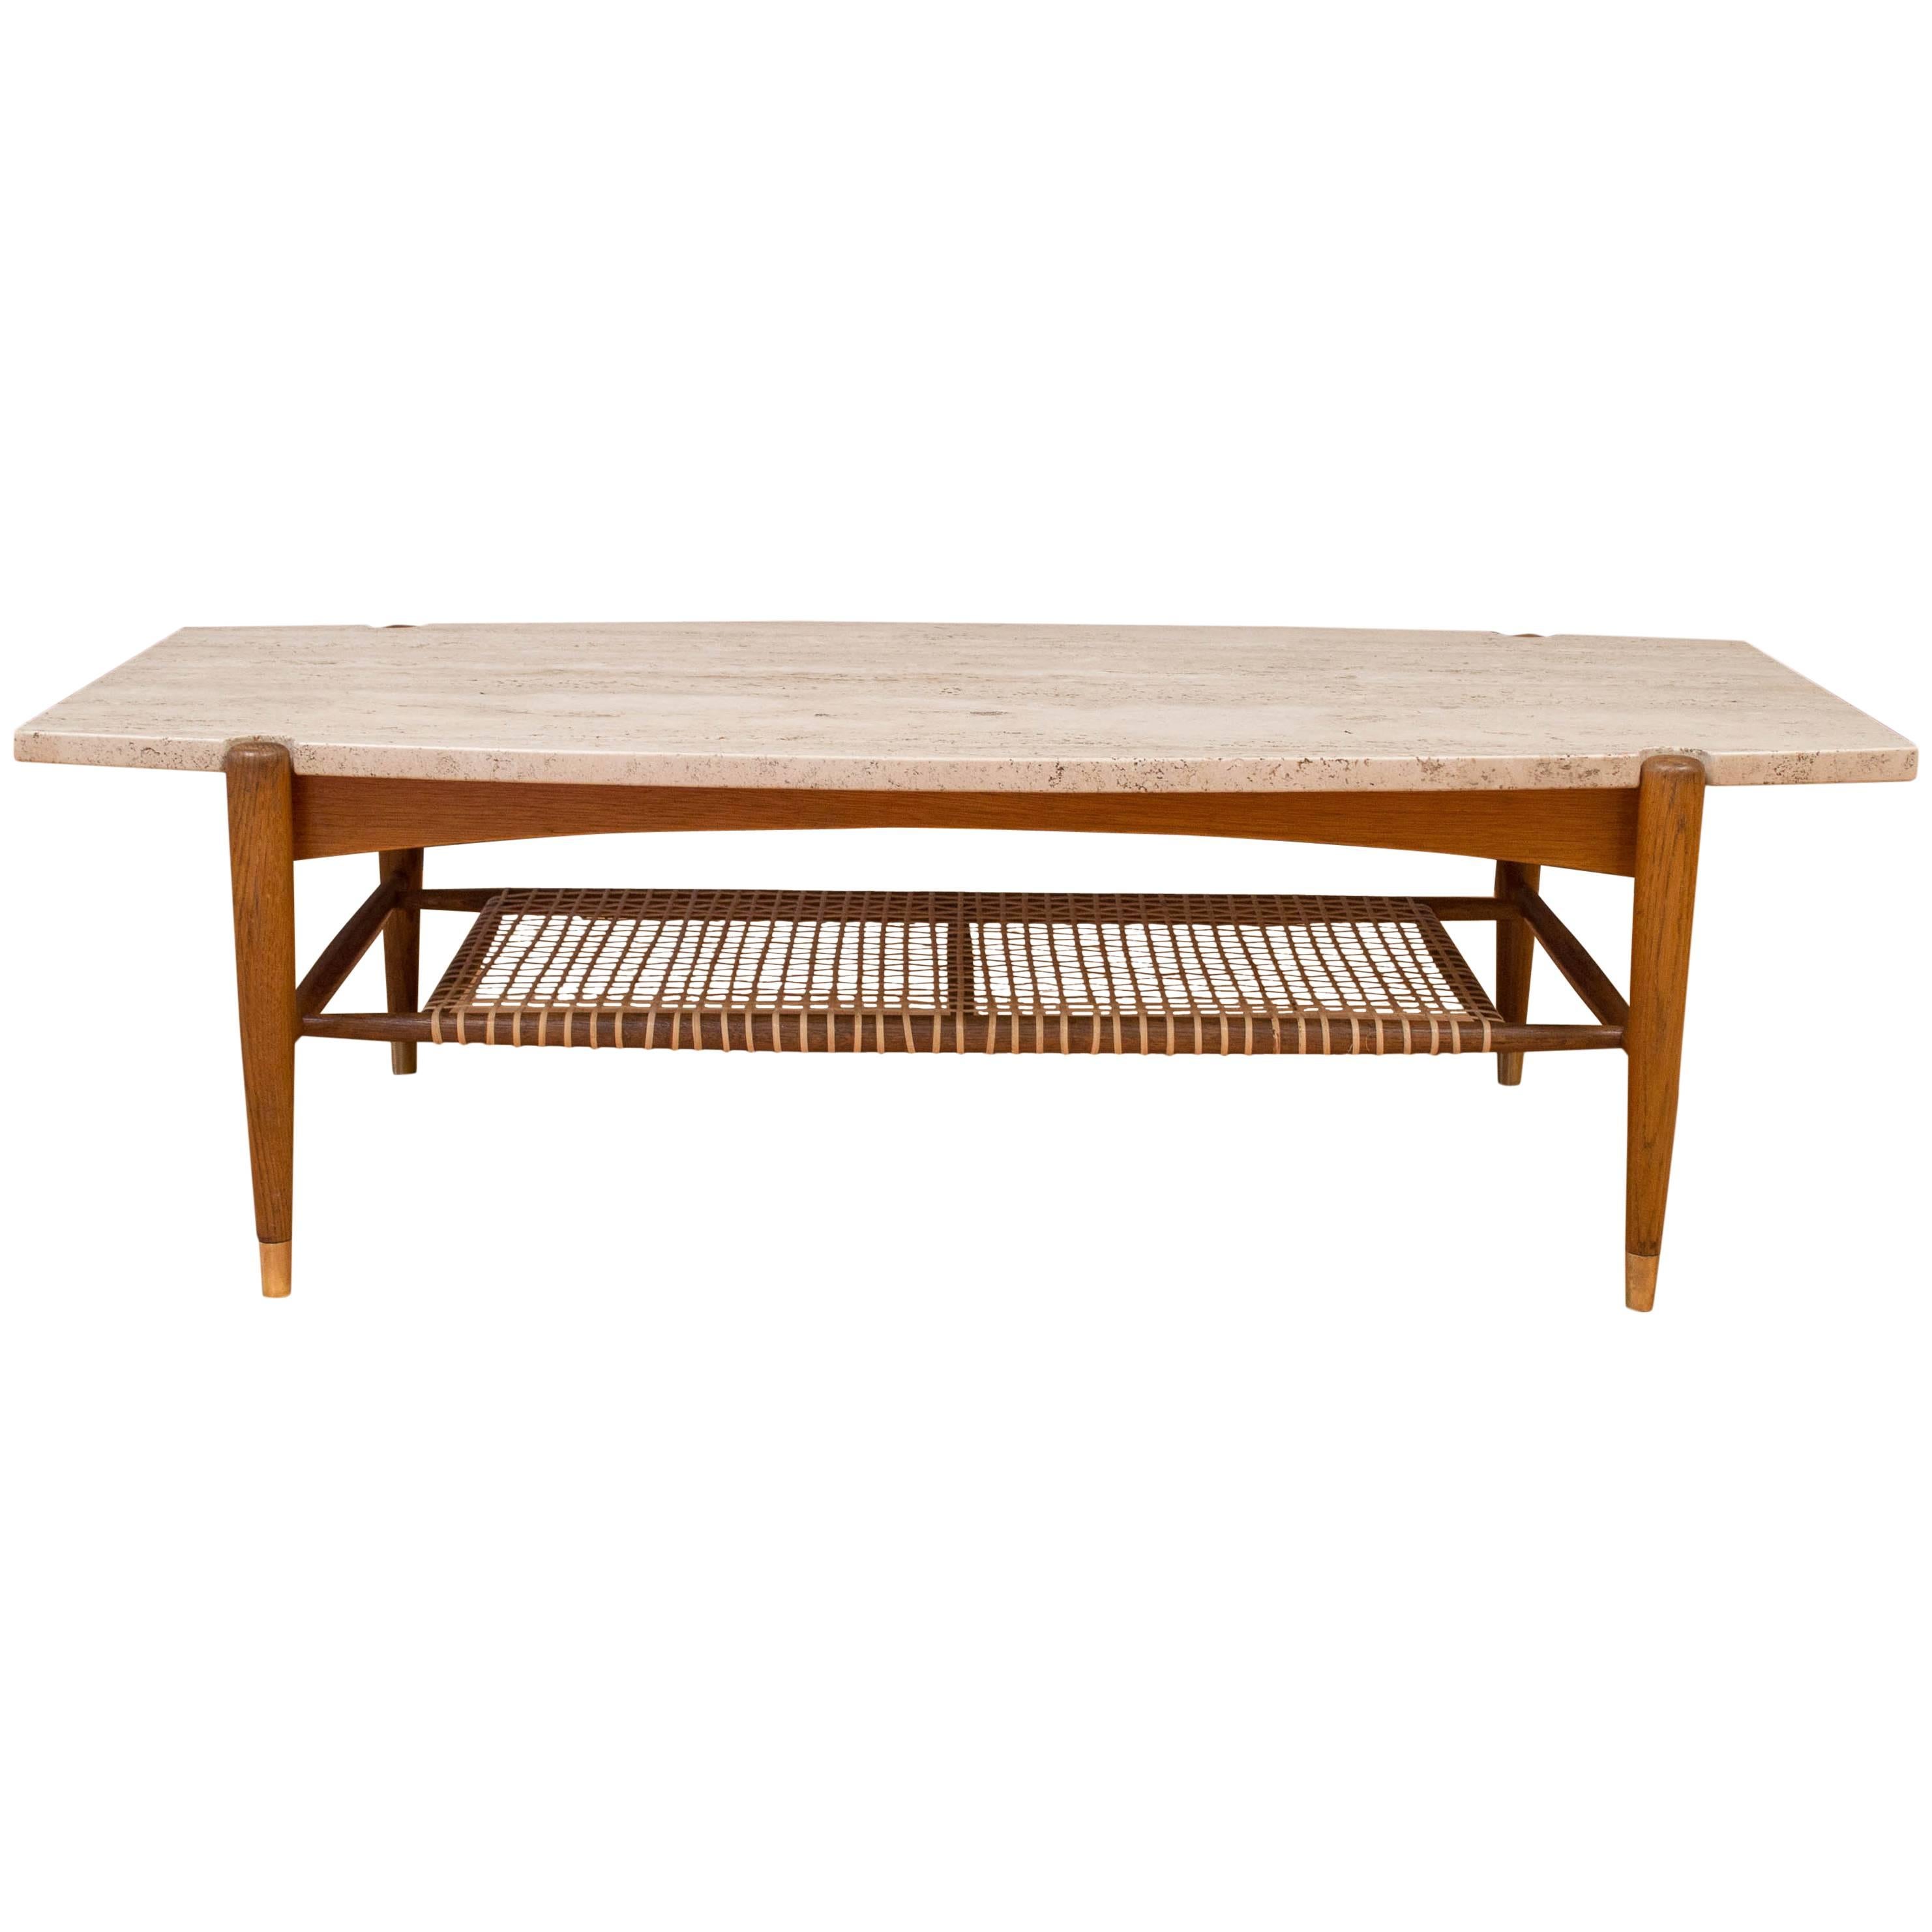 Dux Travertine Coffee Table Attributed to Bruno Mathsson